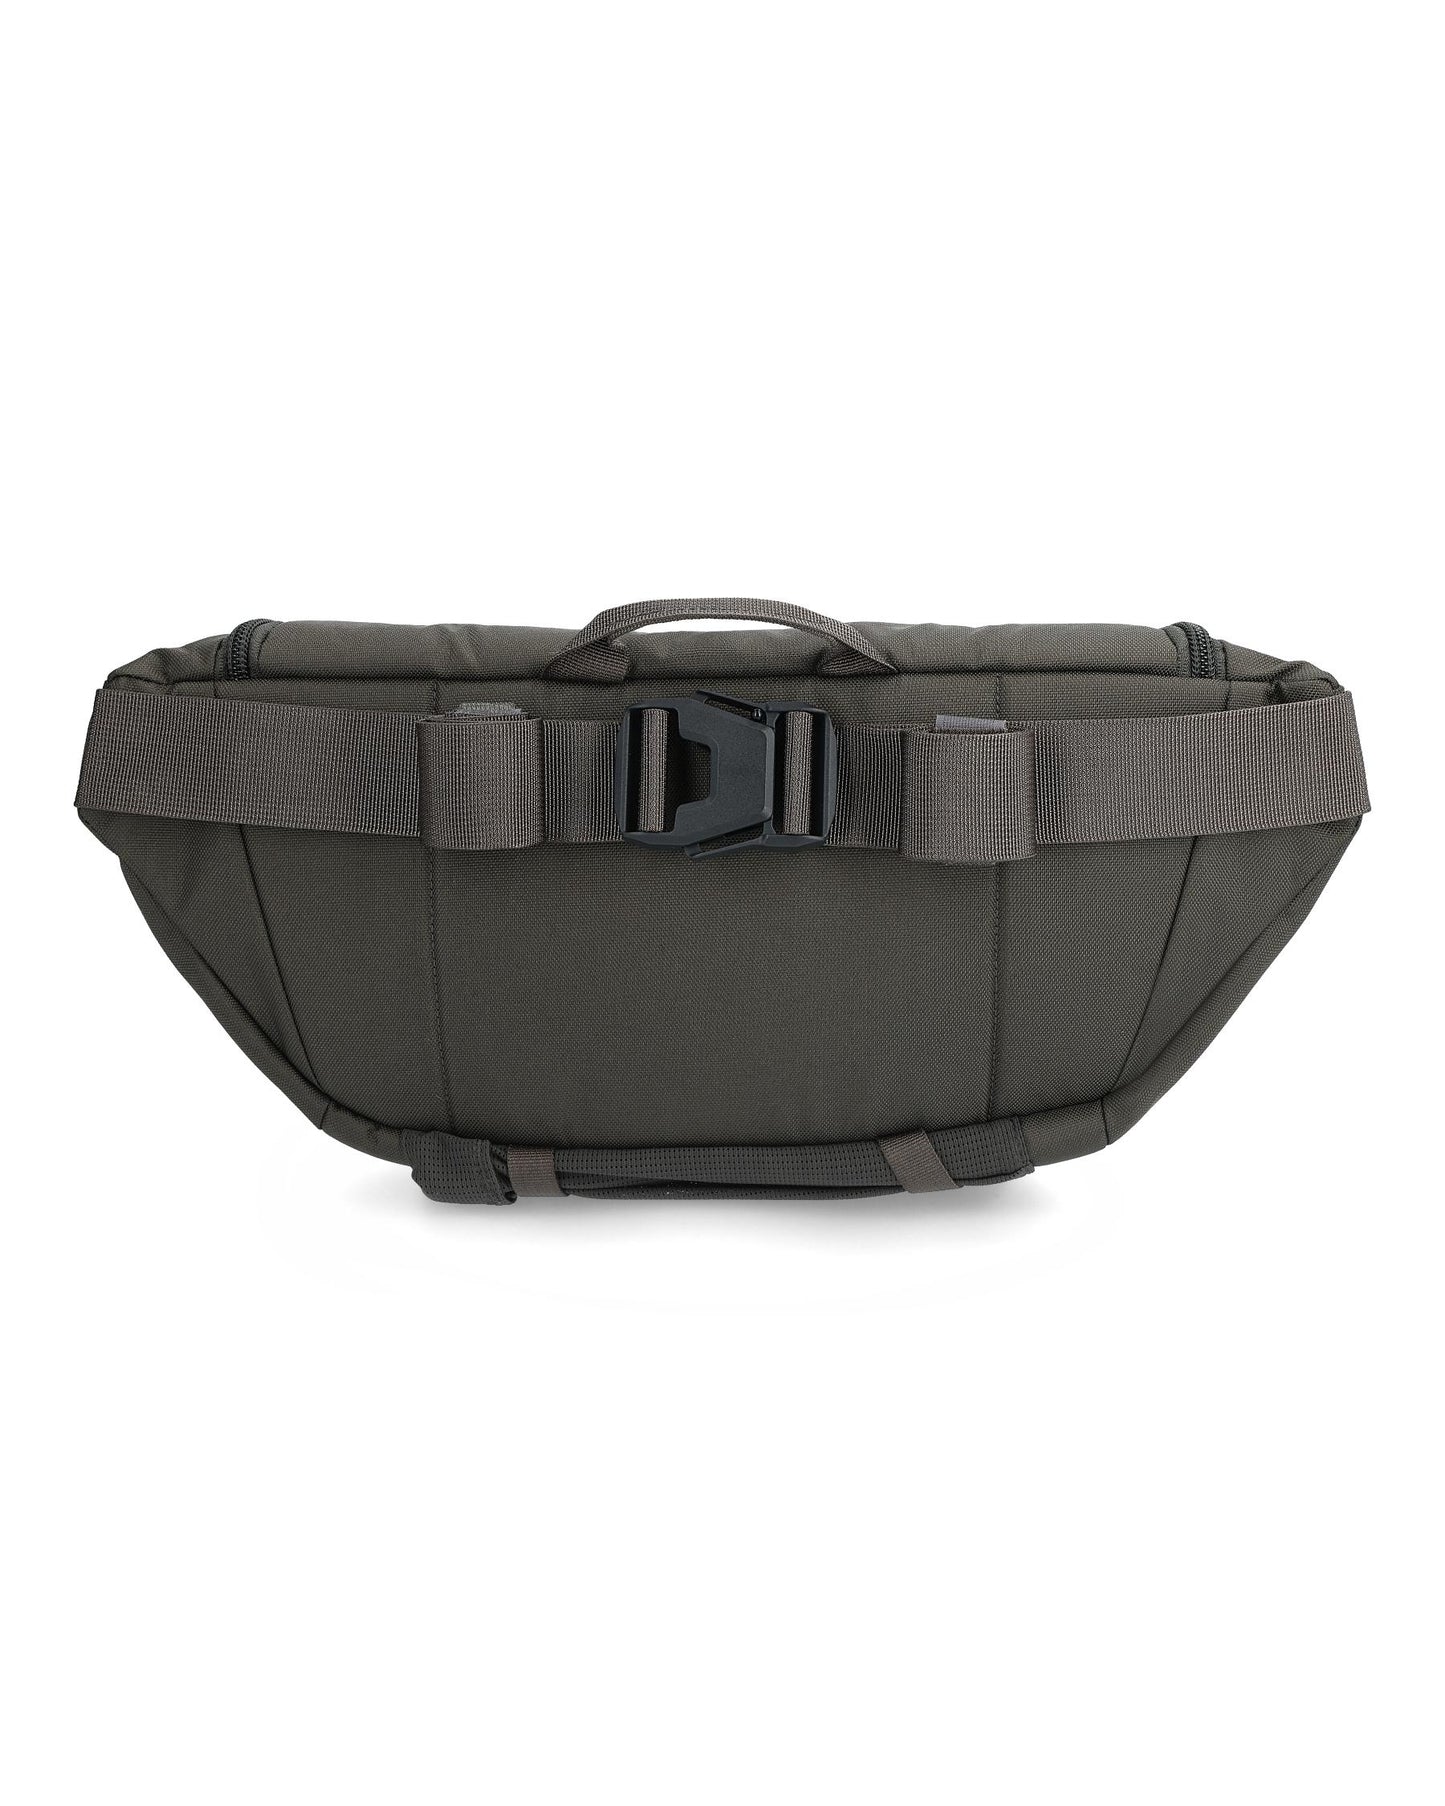 13549-1034-Tributary-Hip-Pack-Tabletop-S24-Back